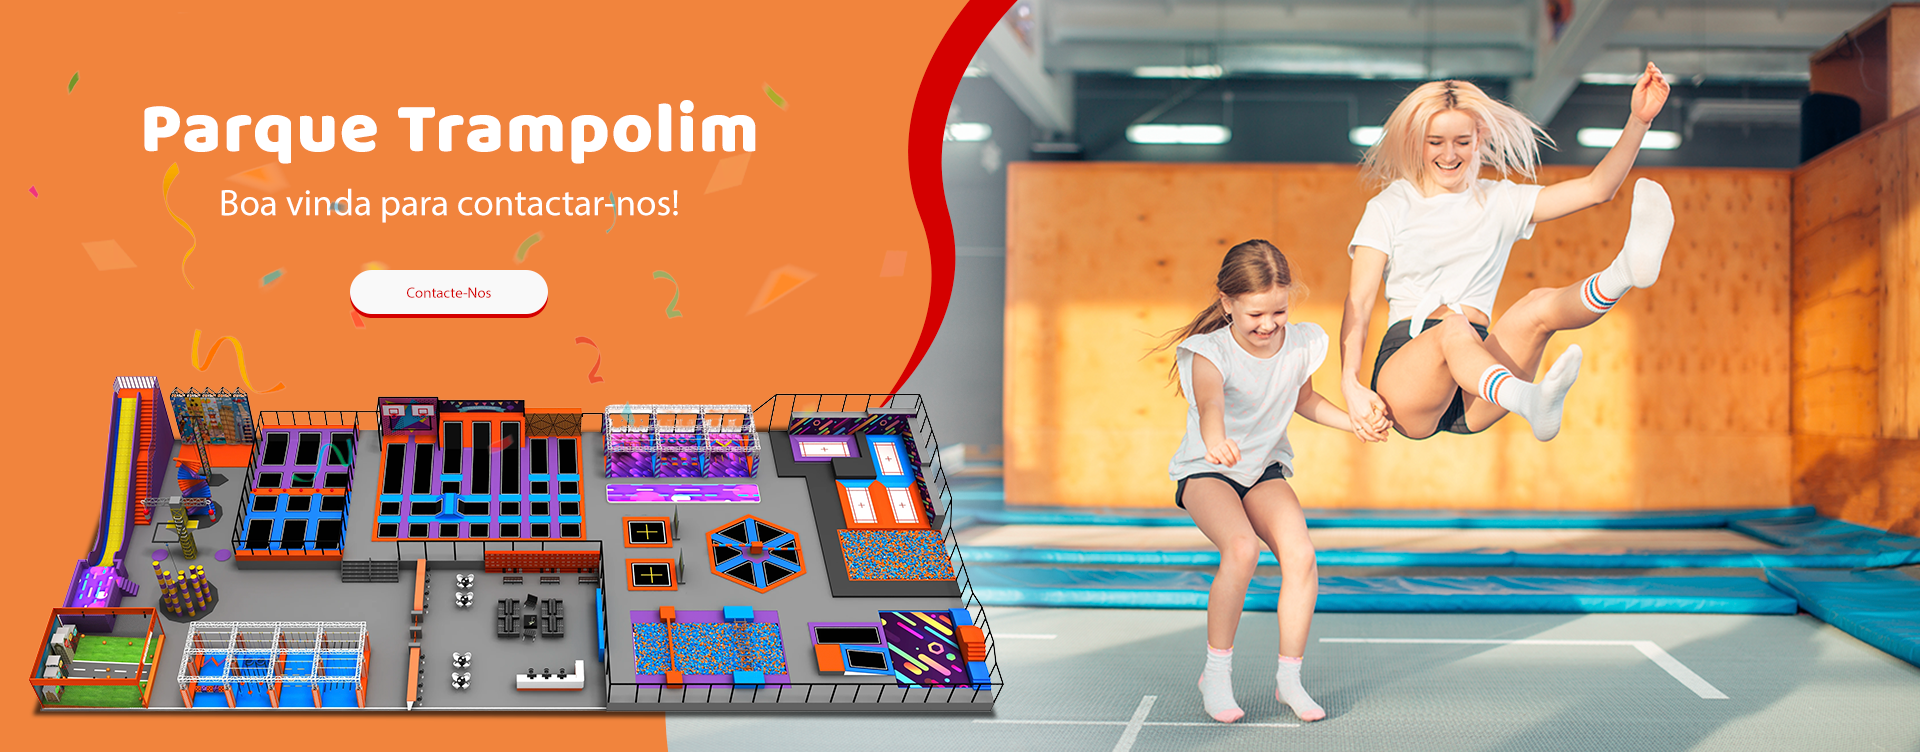 Joyful children playing on trampoline equipment at a trampoline park, highlighting fun and active entertainment options for kids.